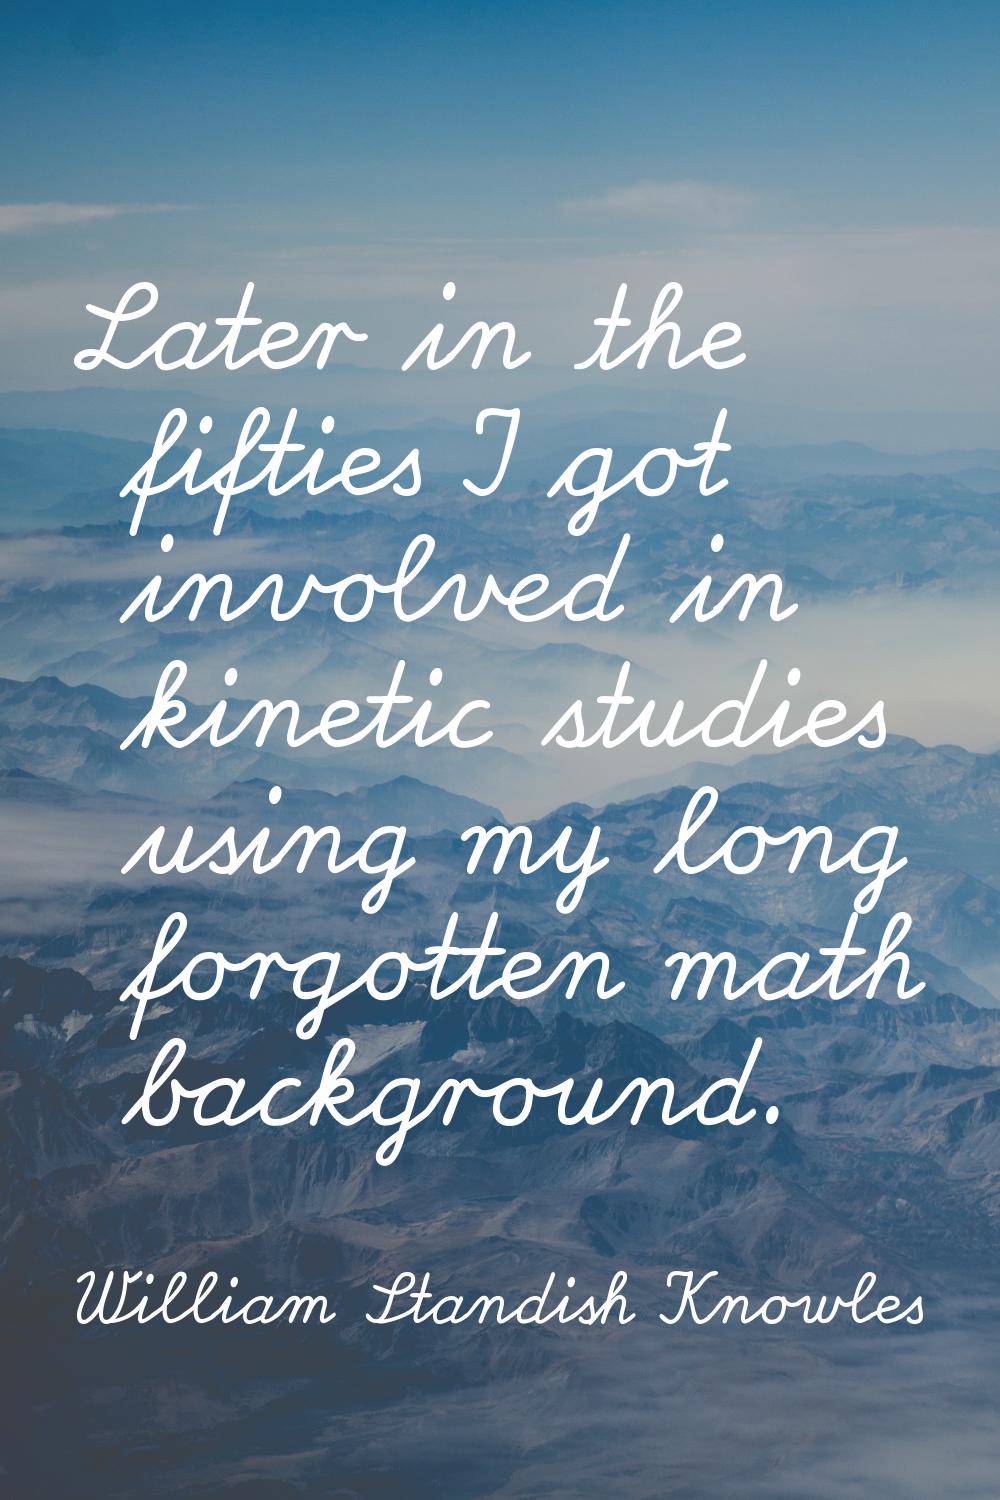 Later in the fifties I got involved in kinetic studies using my long forgotten math background.